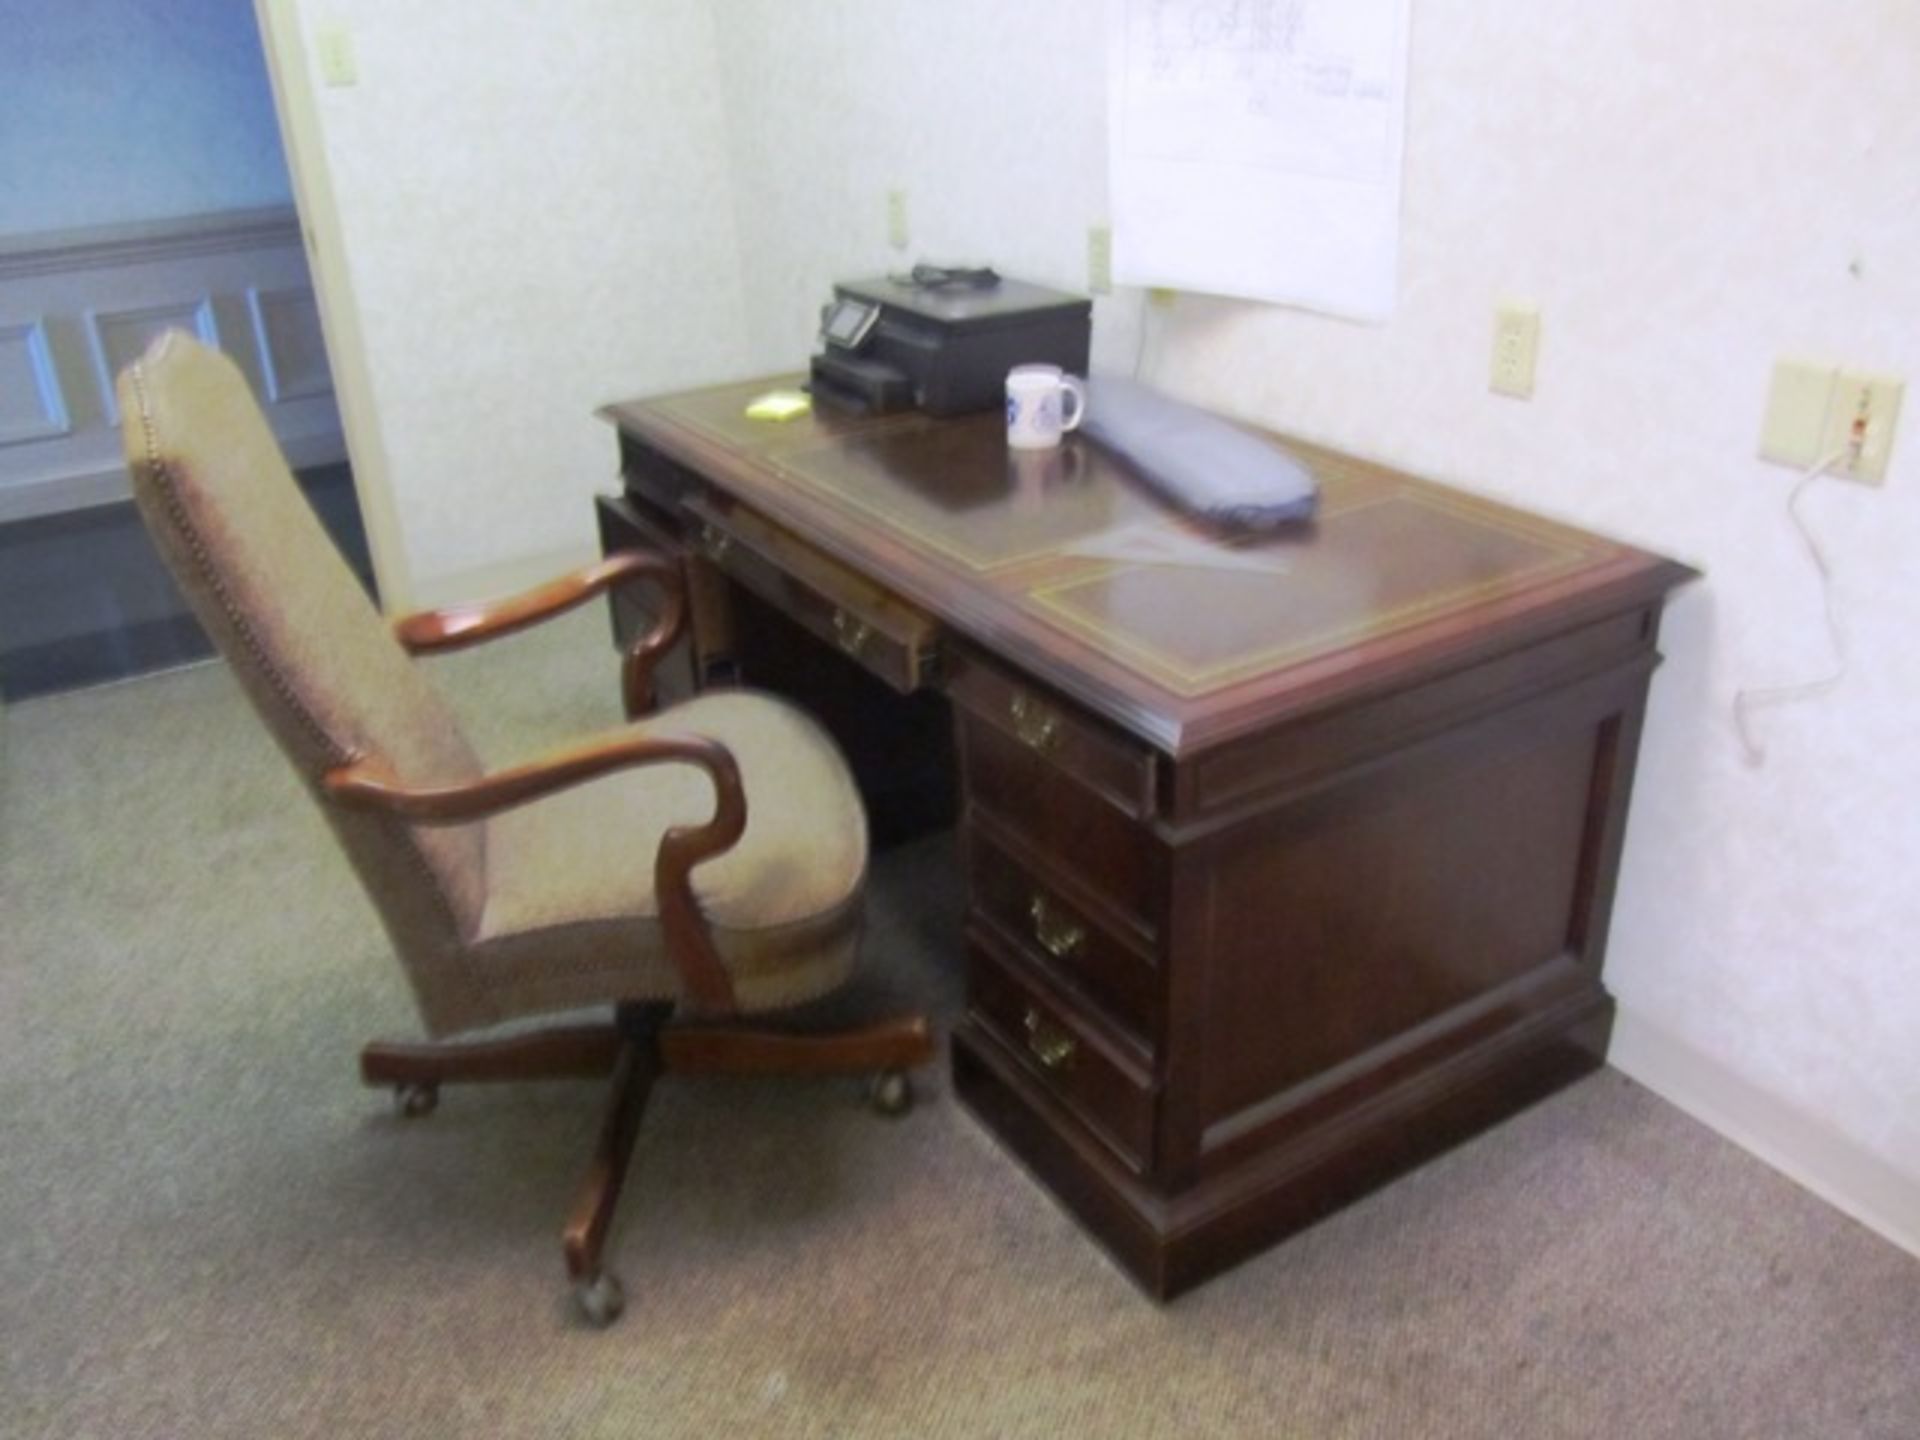 Contents of Office consisting of Desk, Chair